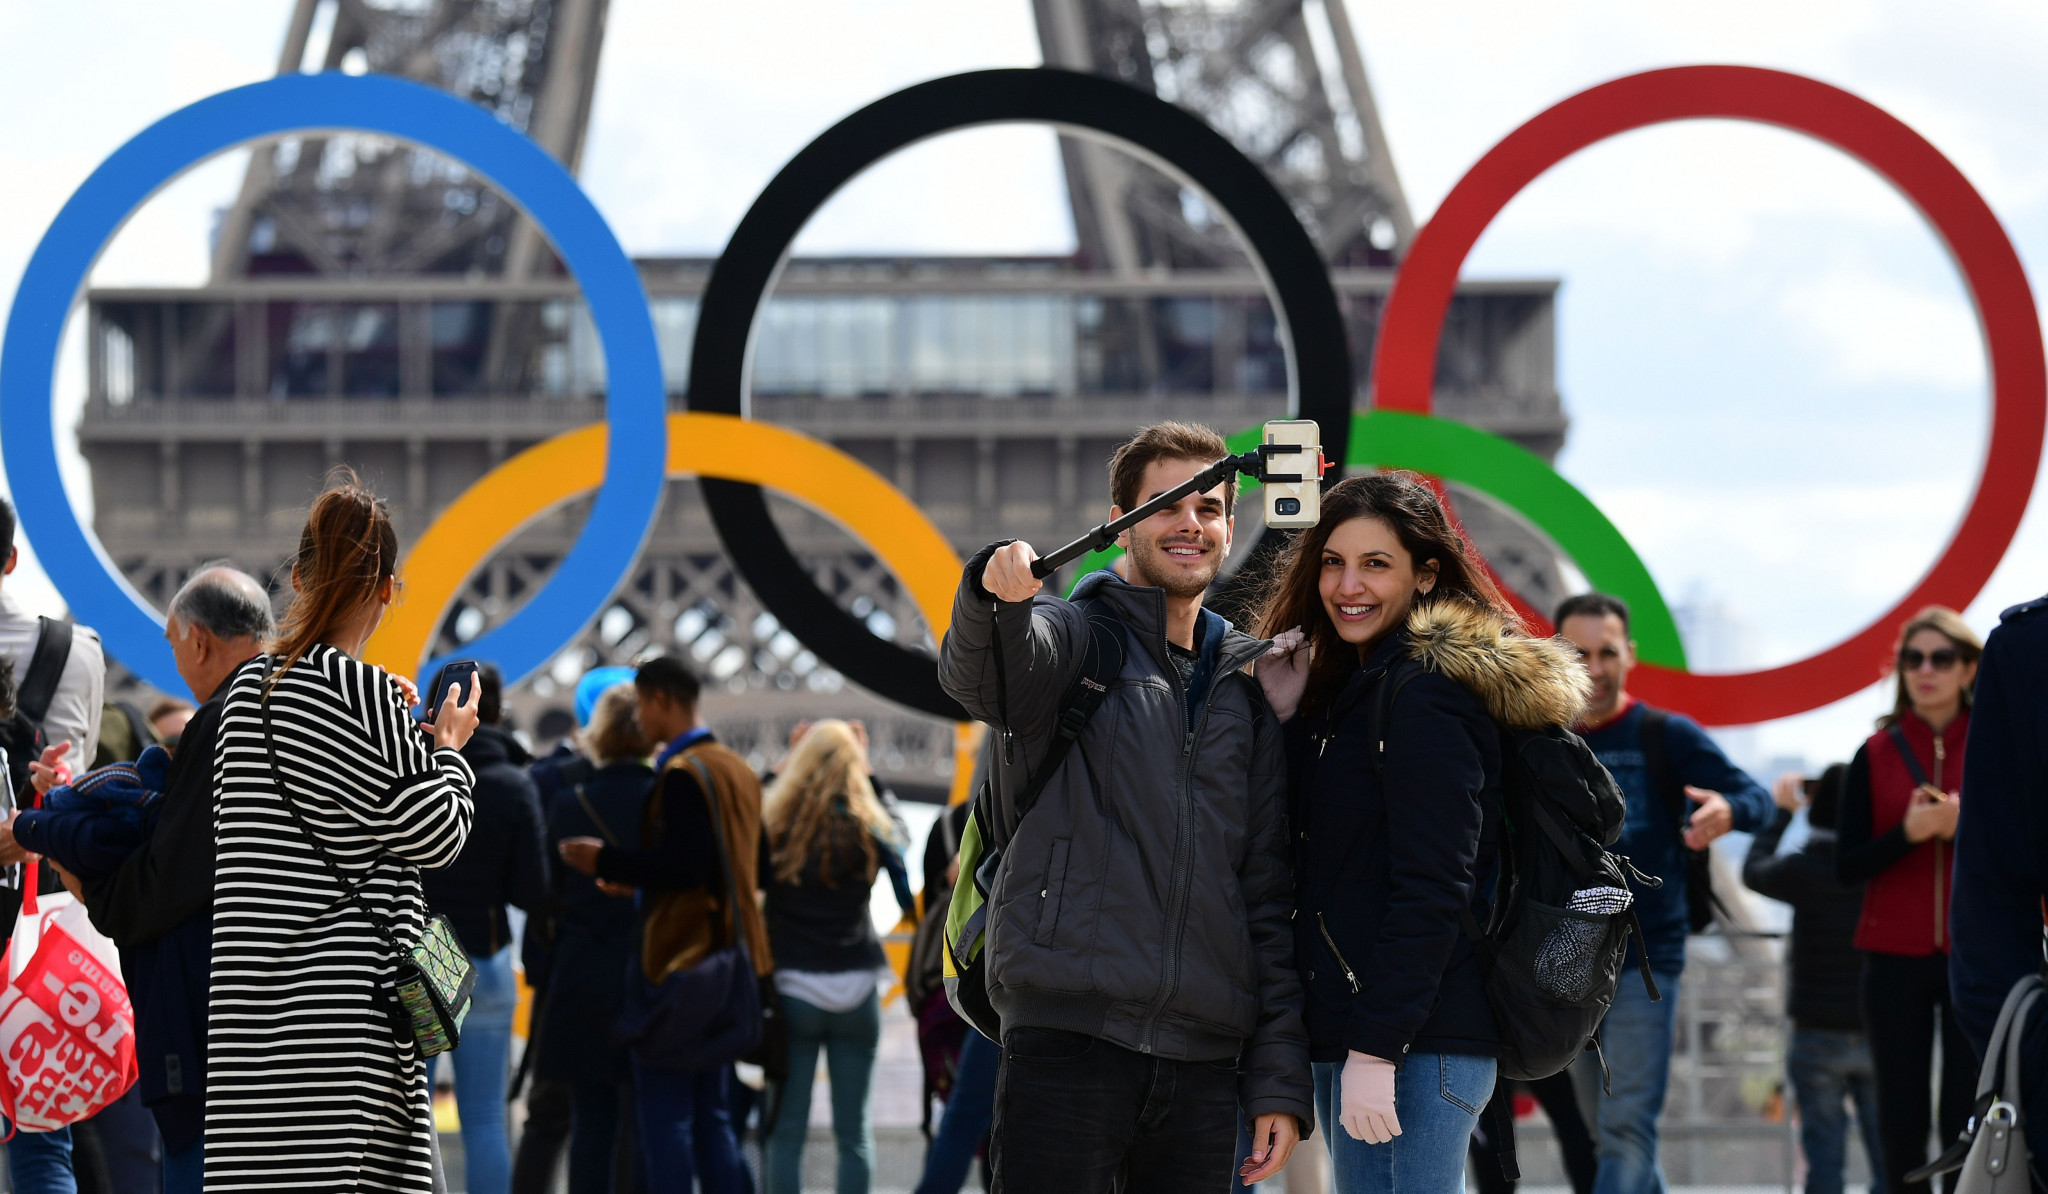 A couple pose for a selfie in front of the Olympics Rings on the Trocadero Esplanade near the Eiffel Tower in Paris. © Getty Images